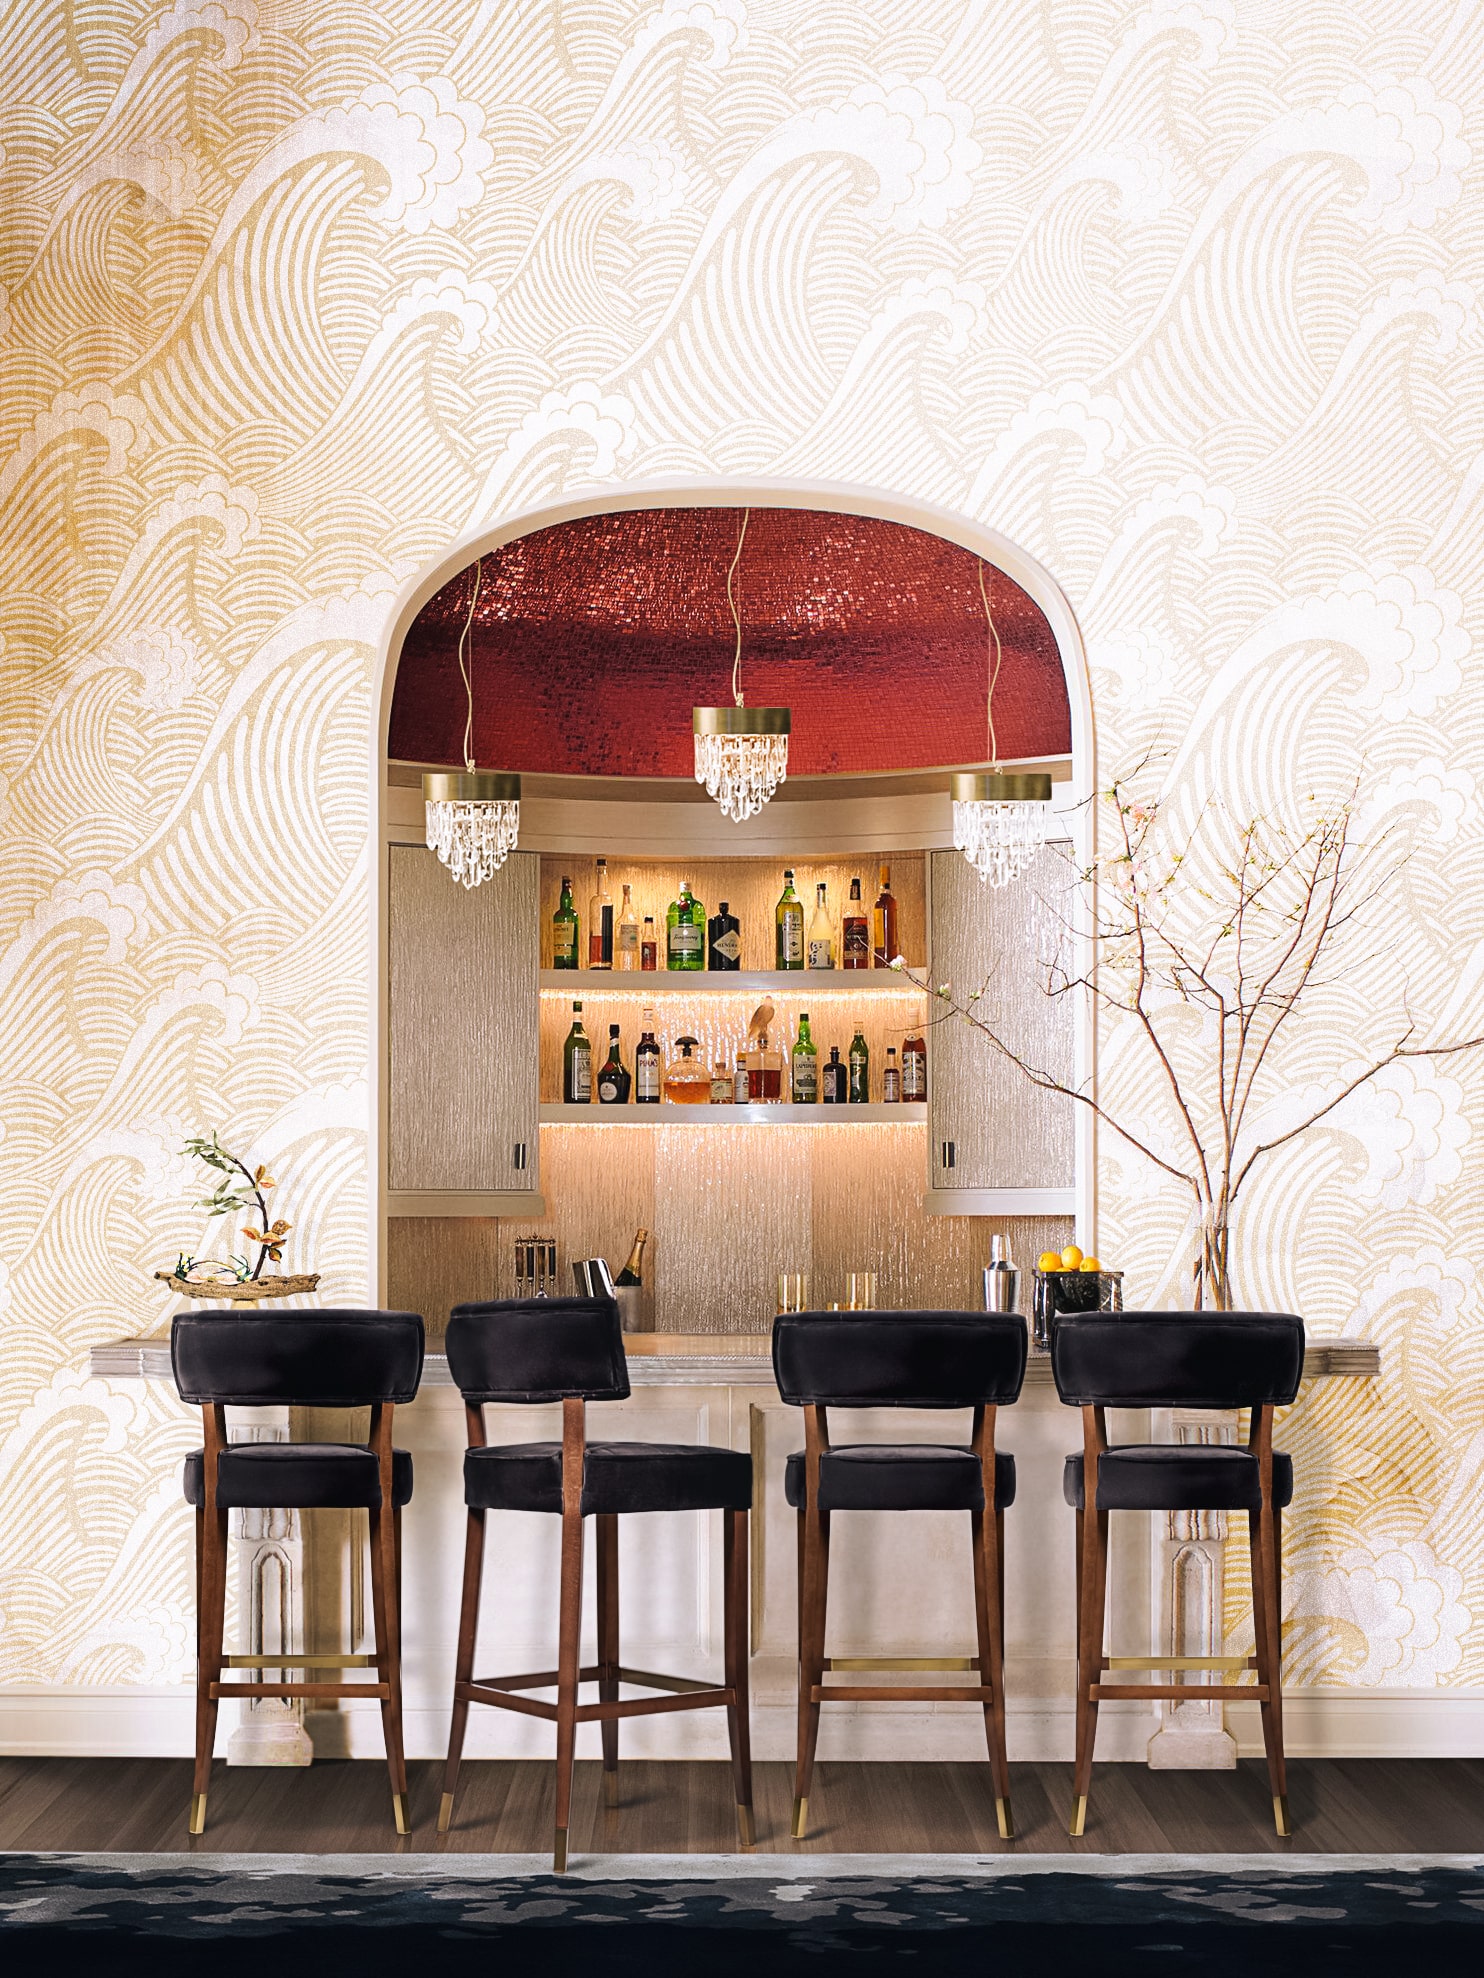 Contemporary Bar Interior Design Inspired By Different Cultures - Home'Society